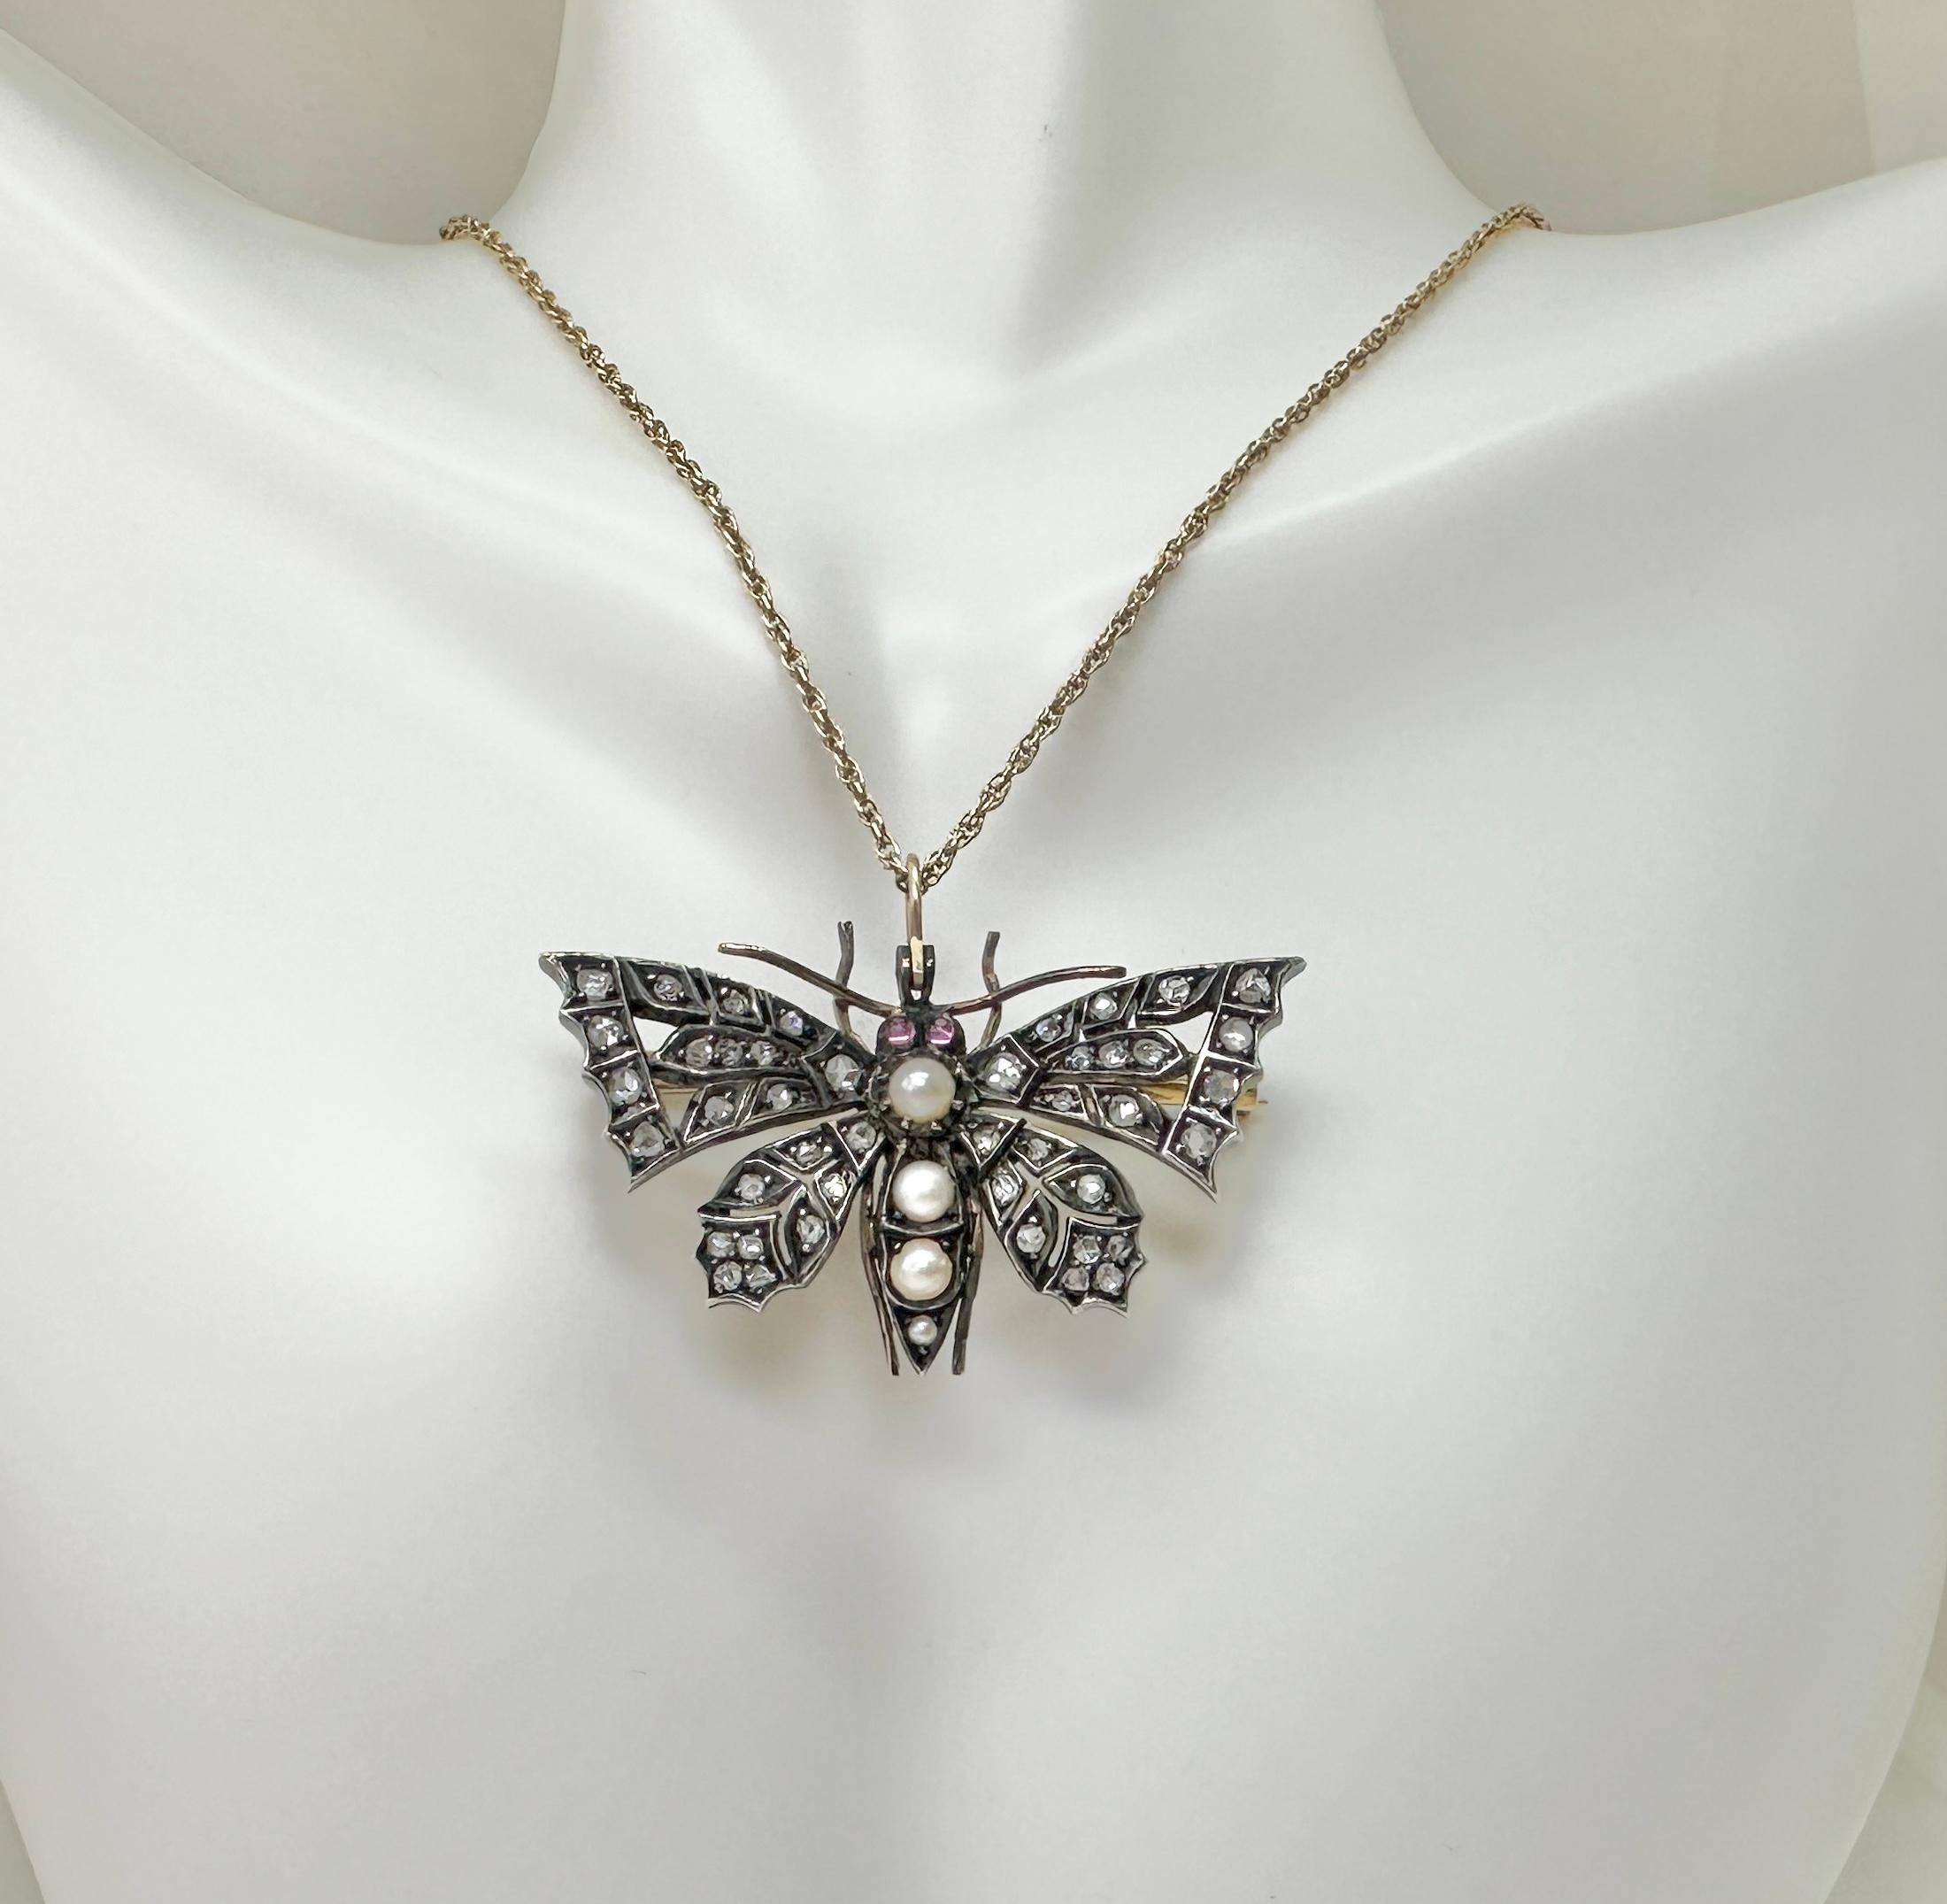 This is a spectacular antique Victorian - Belle Epoque Butterfly Pendant or Brooch set throughout with Rose Cut Diamonds, Pearls and Rubies in a gorgeous open work design in Silver atop 14 Karat Yellow Gold.  This is one of the most beautiful